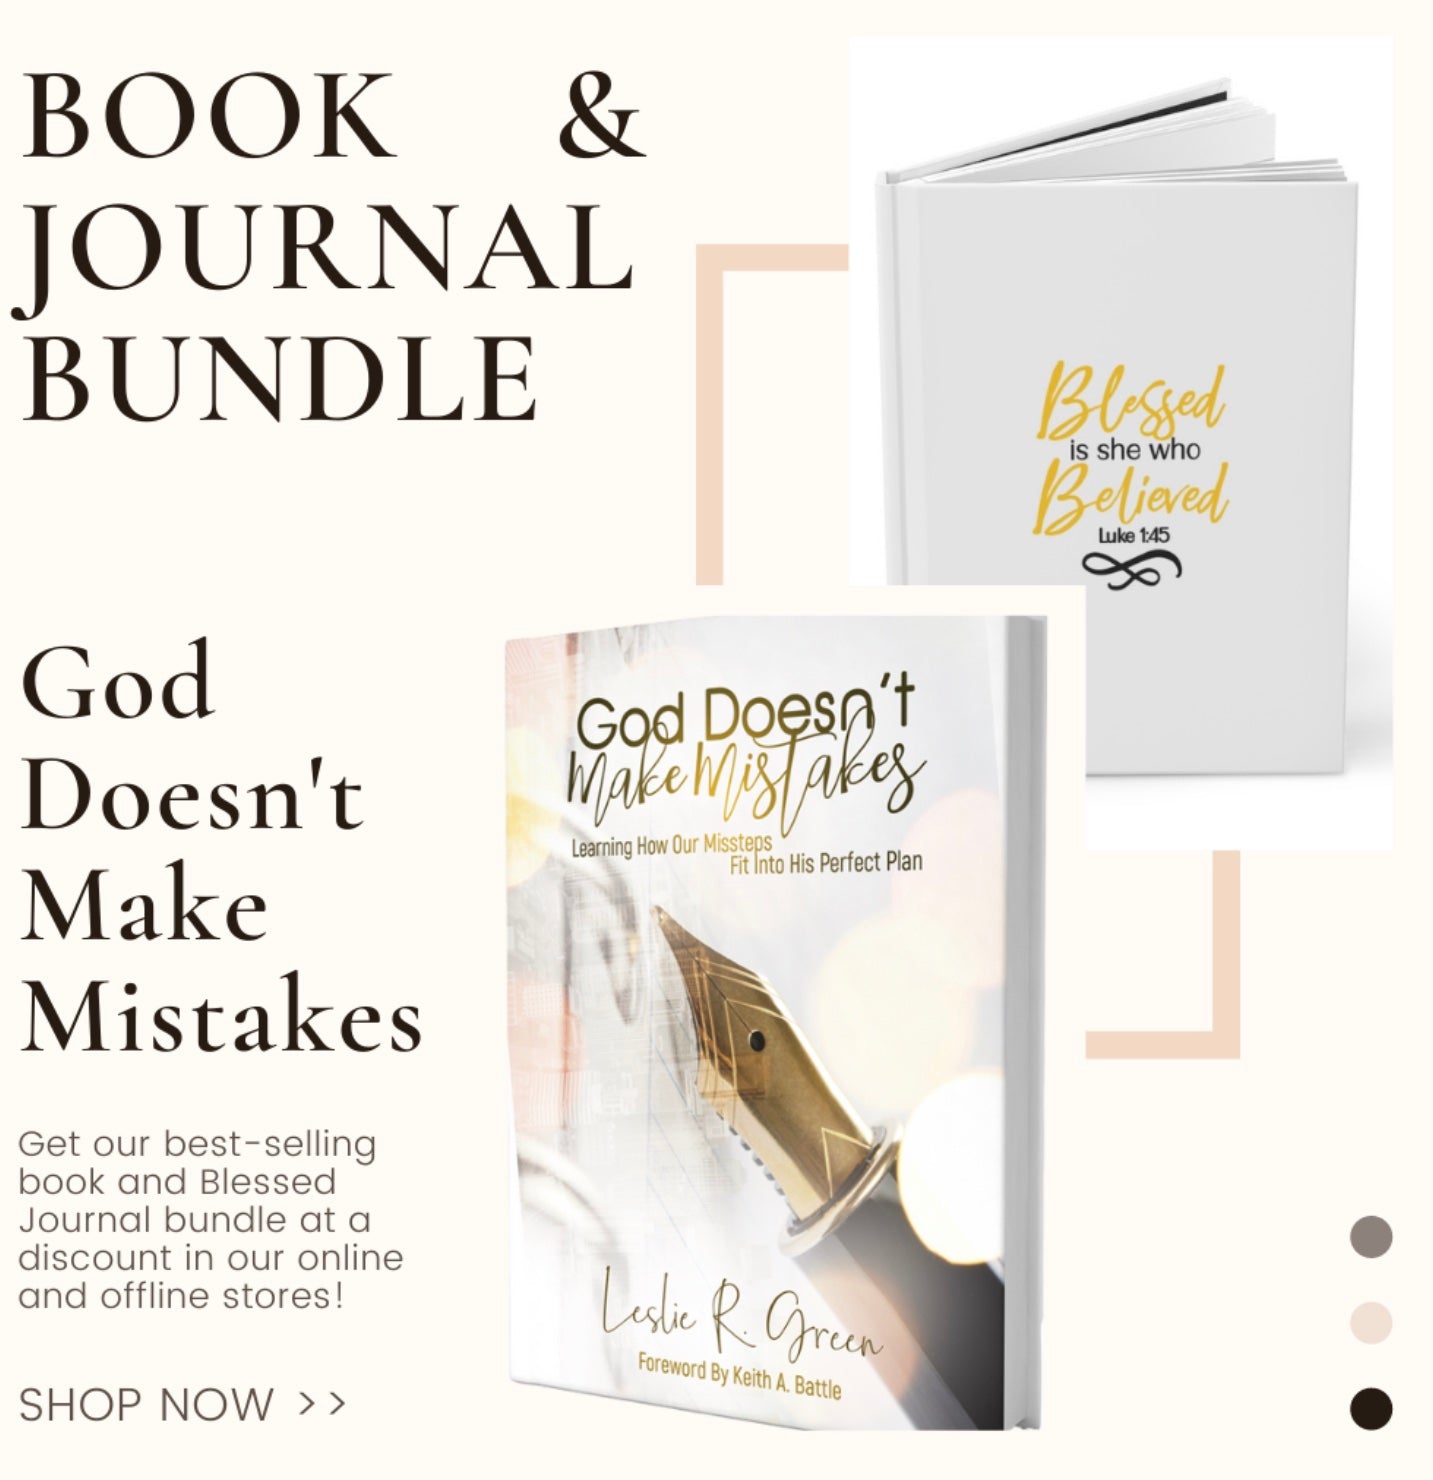 God Doesn't Make Mistakes Book & Blessed Journal Bundle